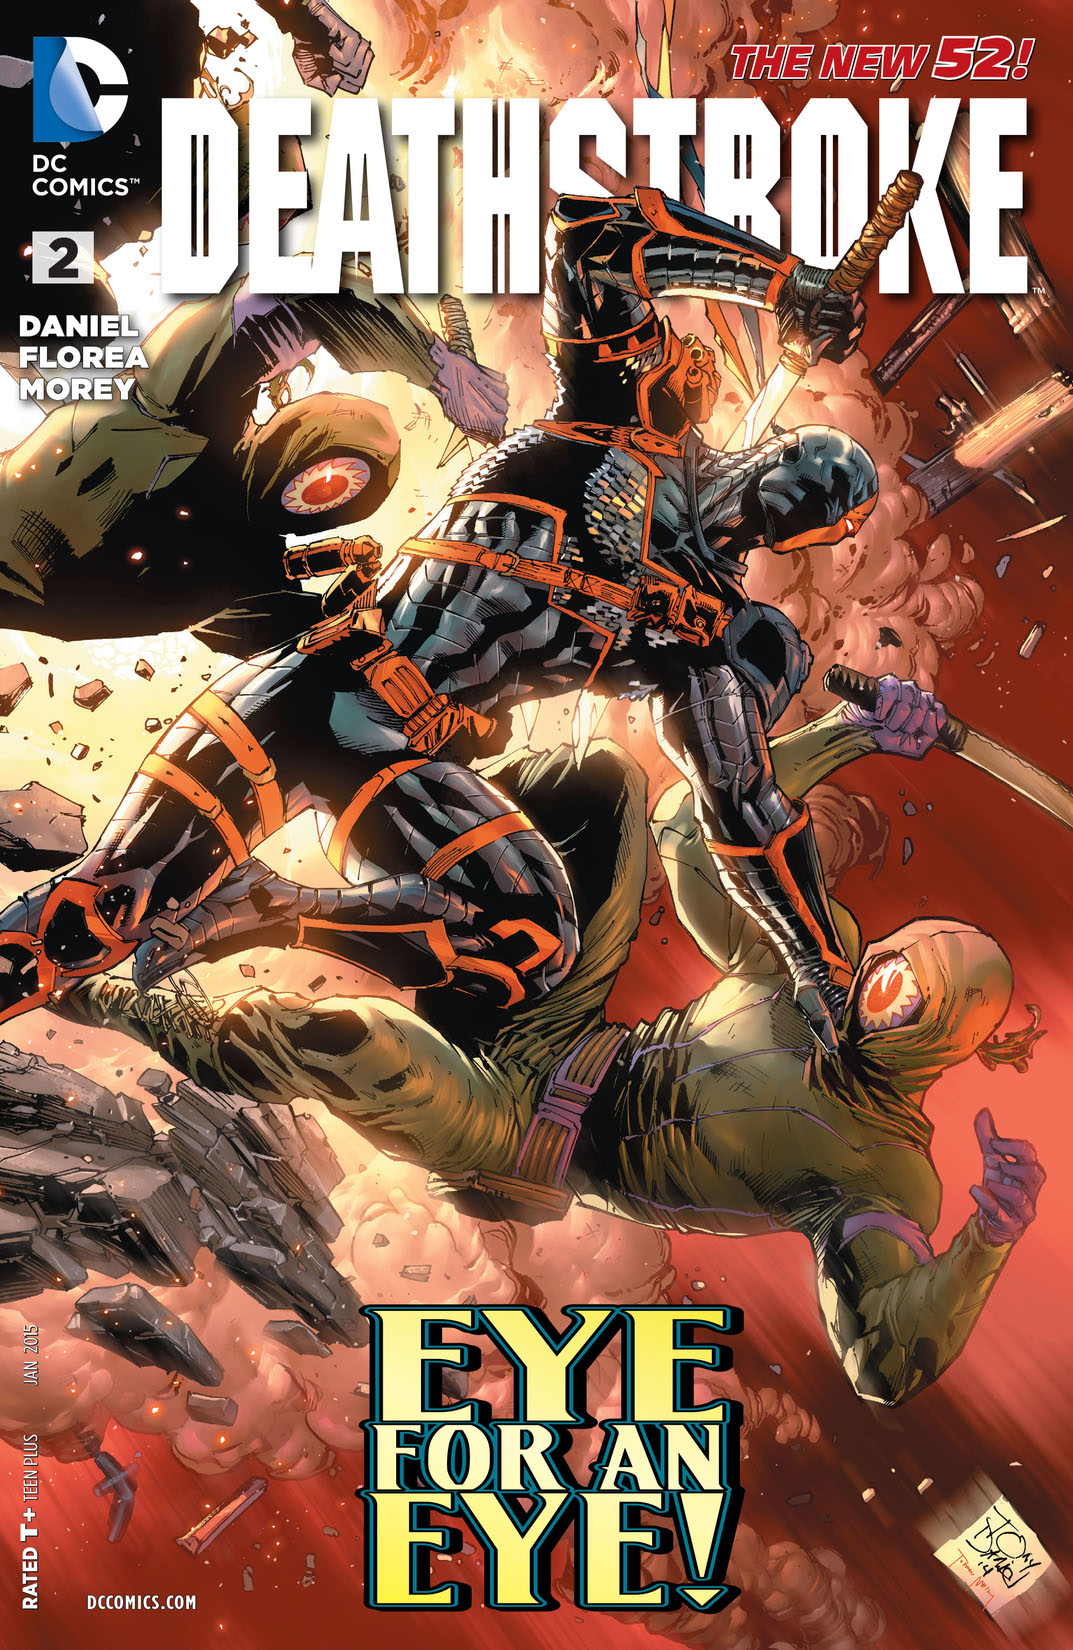 Deathstroke (2014-) #2 preview images